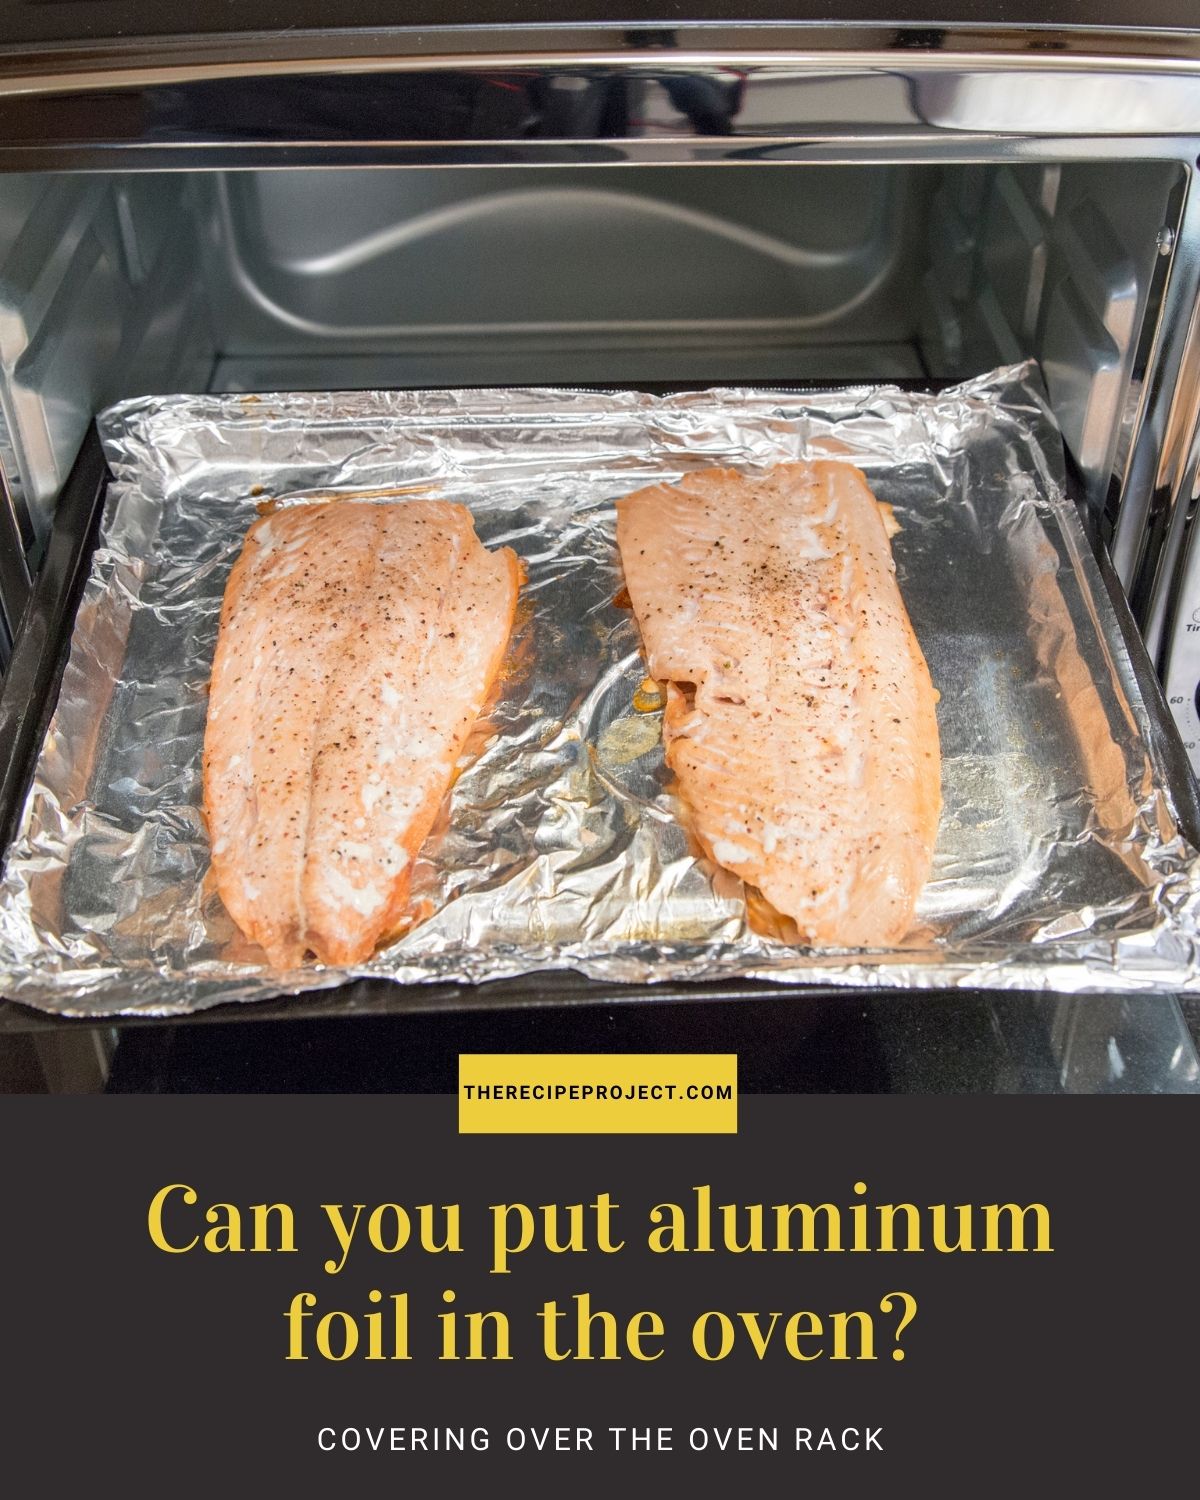 can you put aluminum foil in the microwave oven